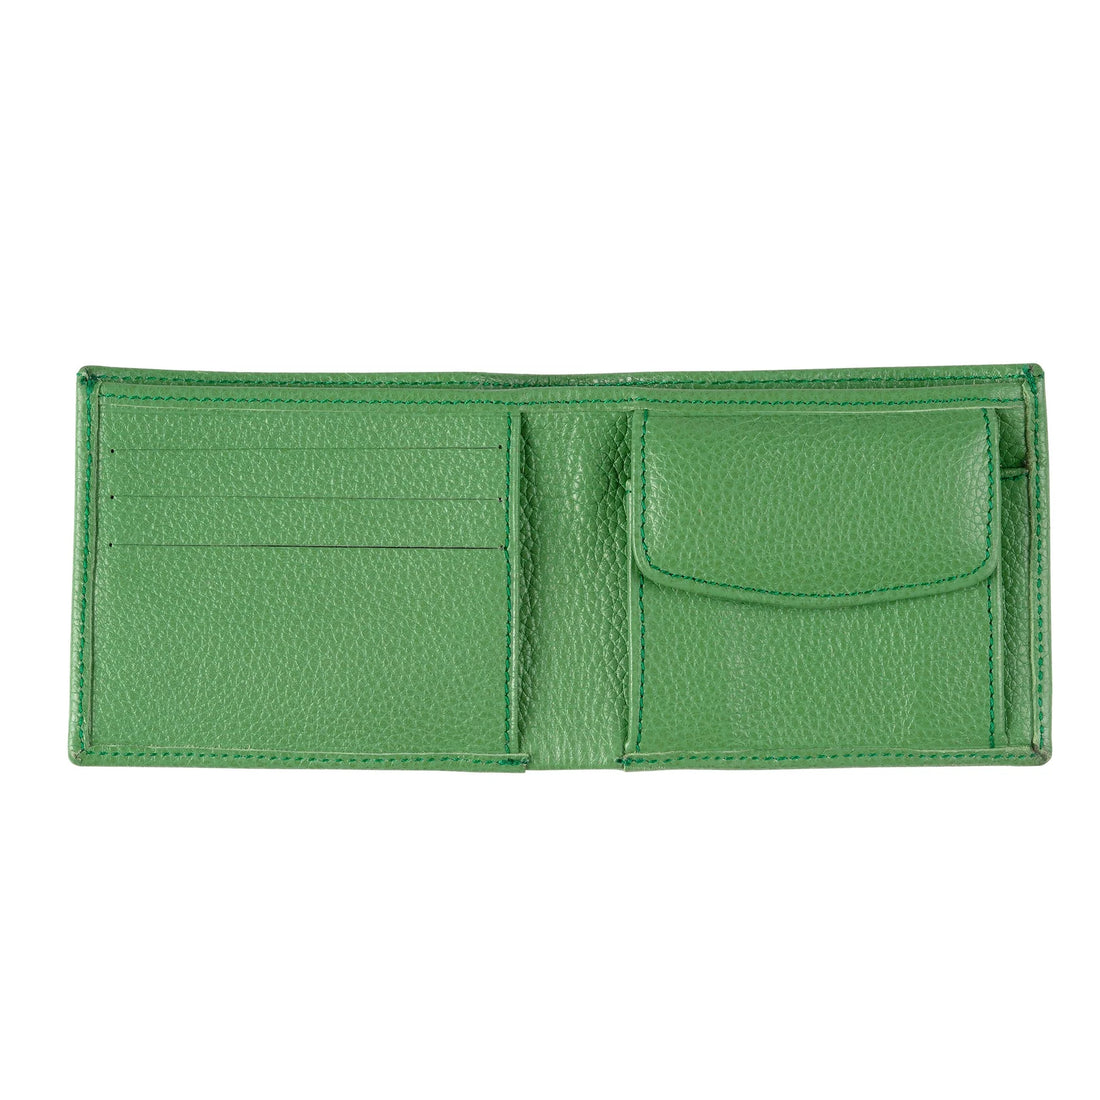 THE GREEN WALLET